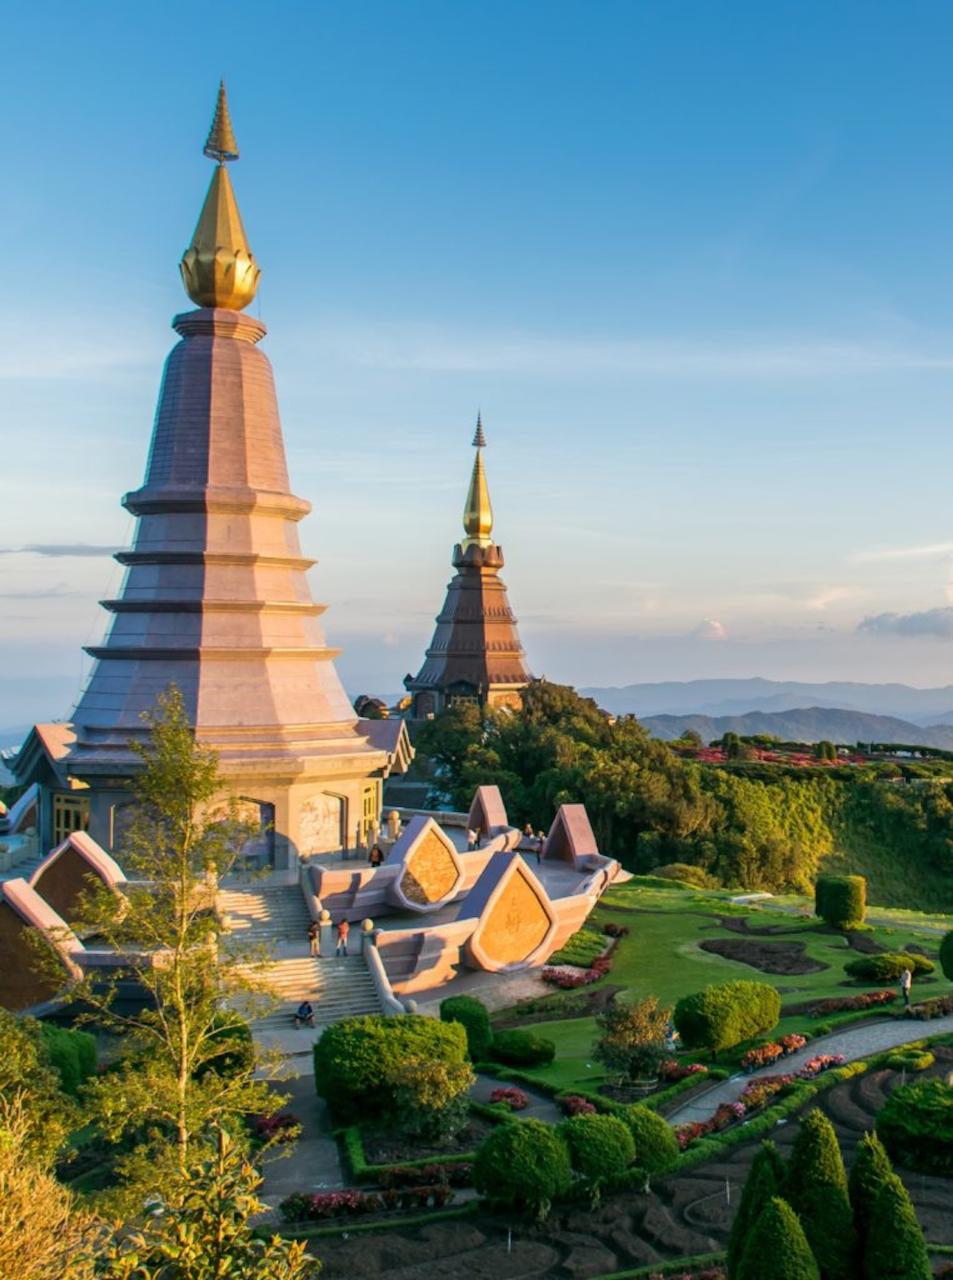 Doi Inthanon Full day Tour From Chiang Mai